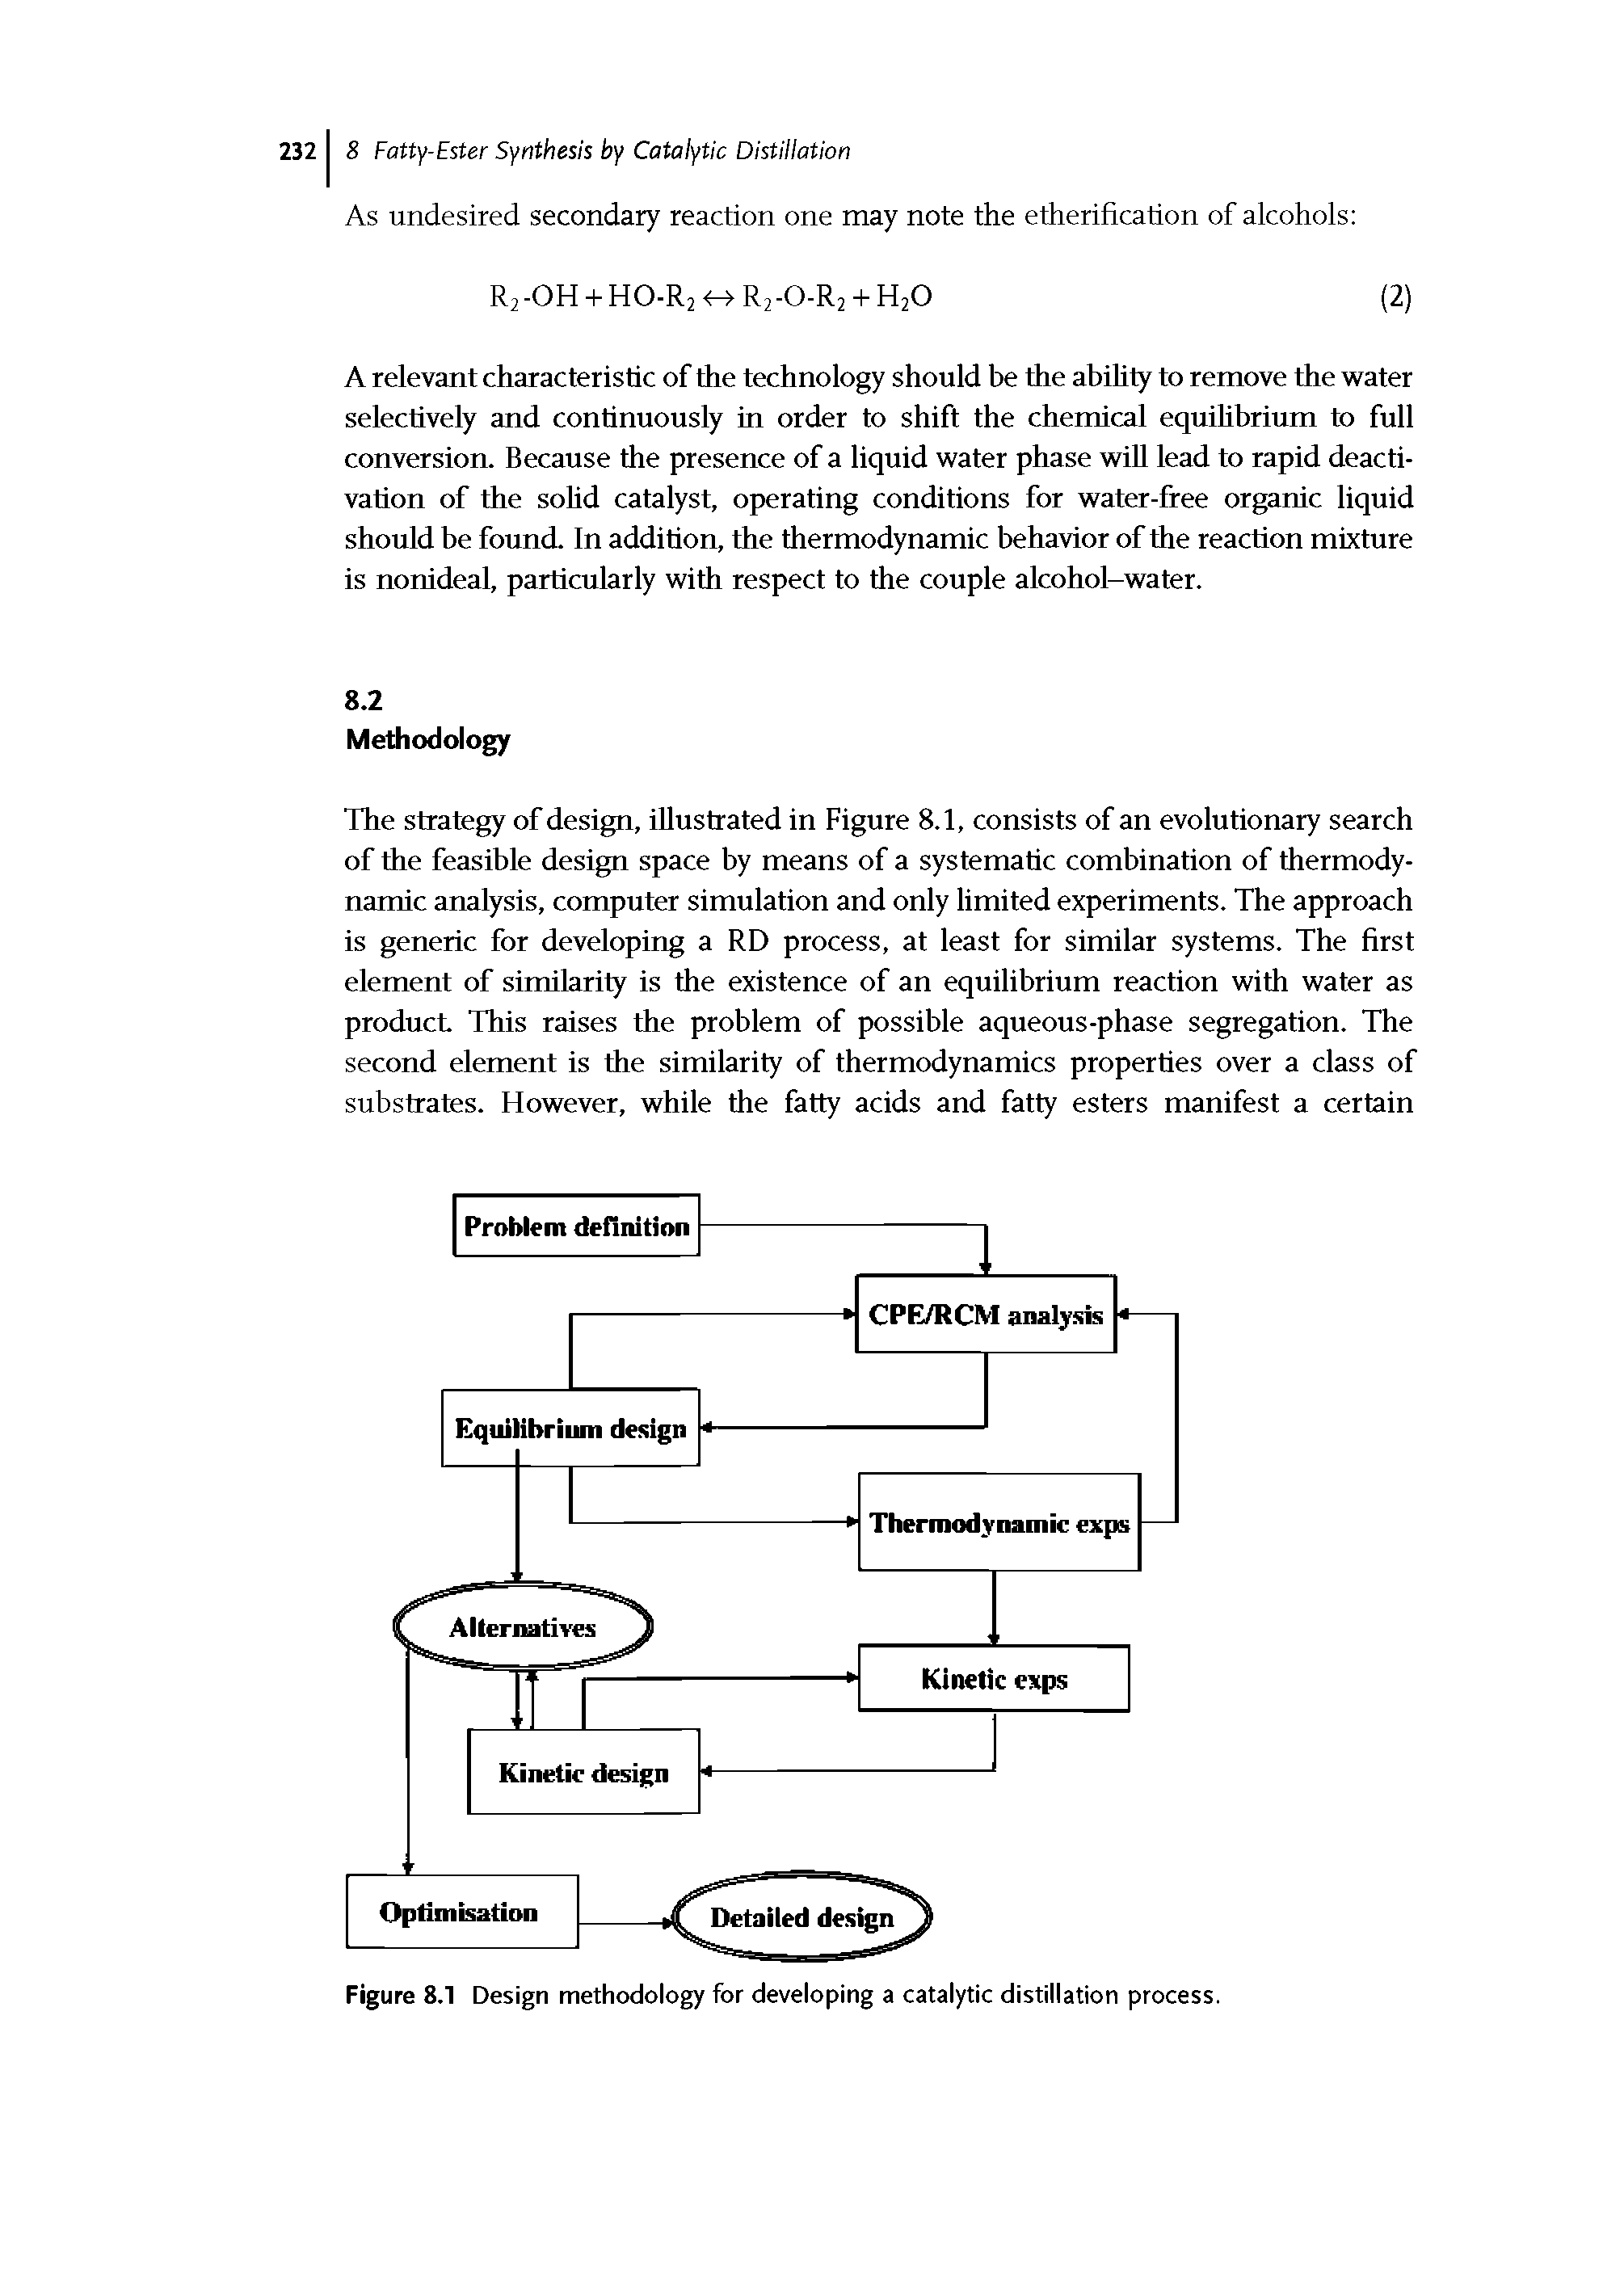 Figure 8.1 Design methodology for developing a catalytic distillation process.